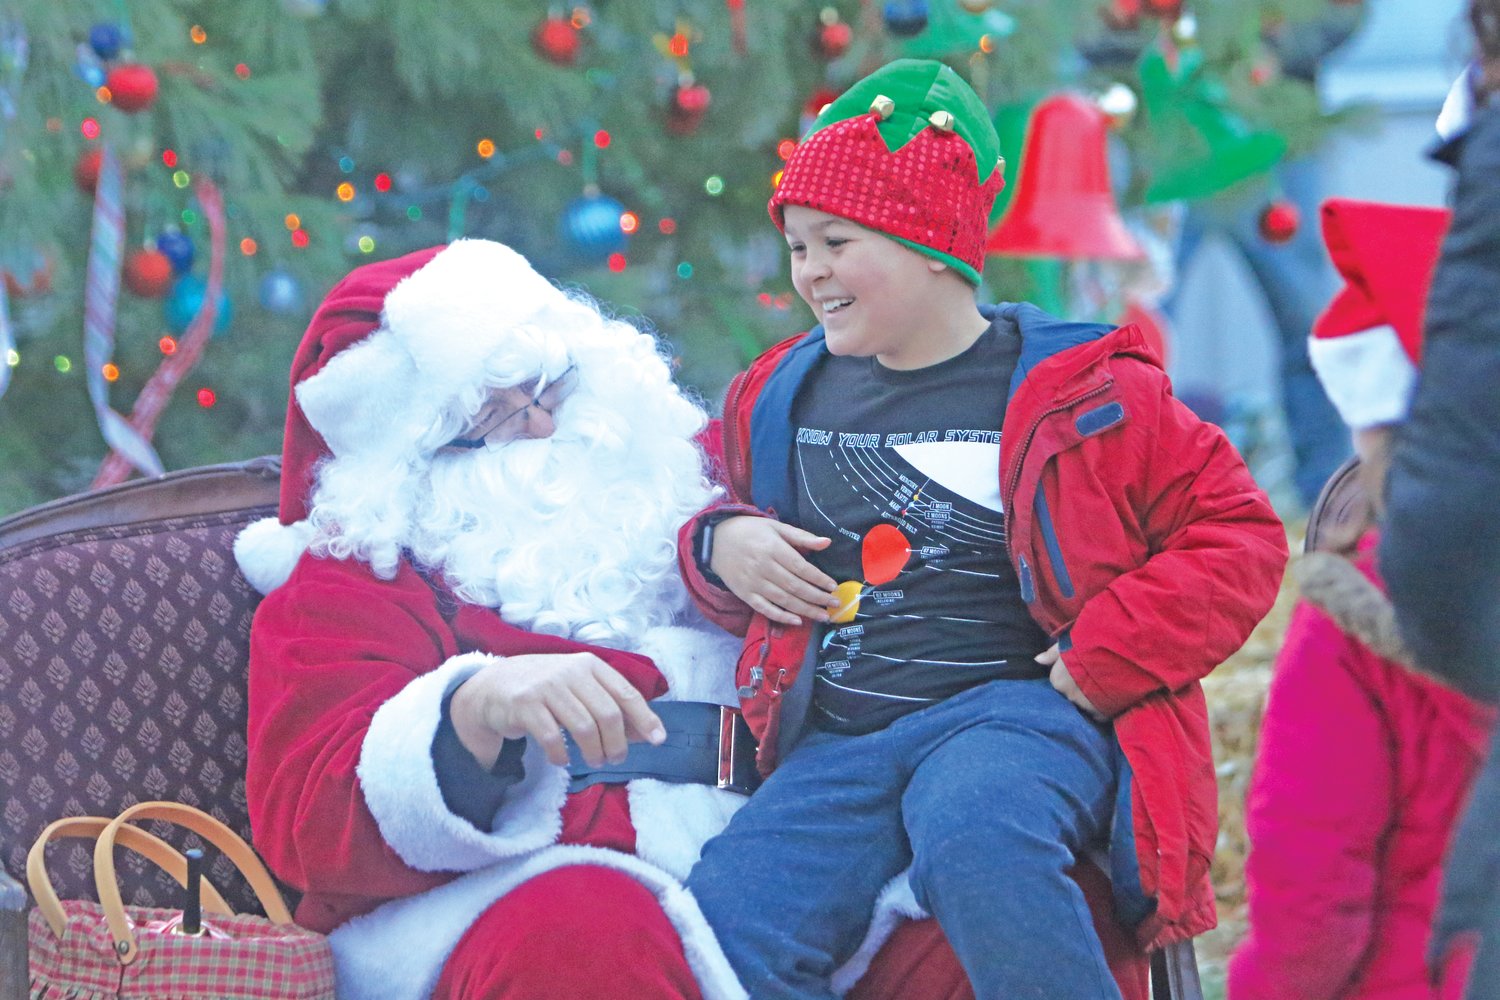 Children were more than happy to meet with Santa at Lone Tree Winter Fest on Nov. 26.